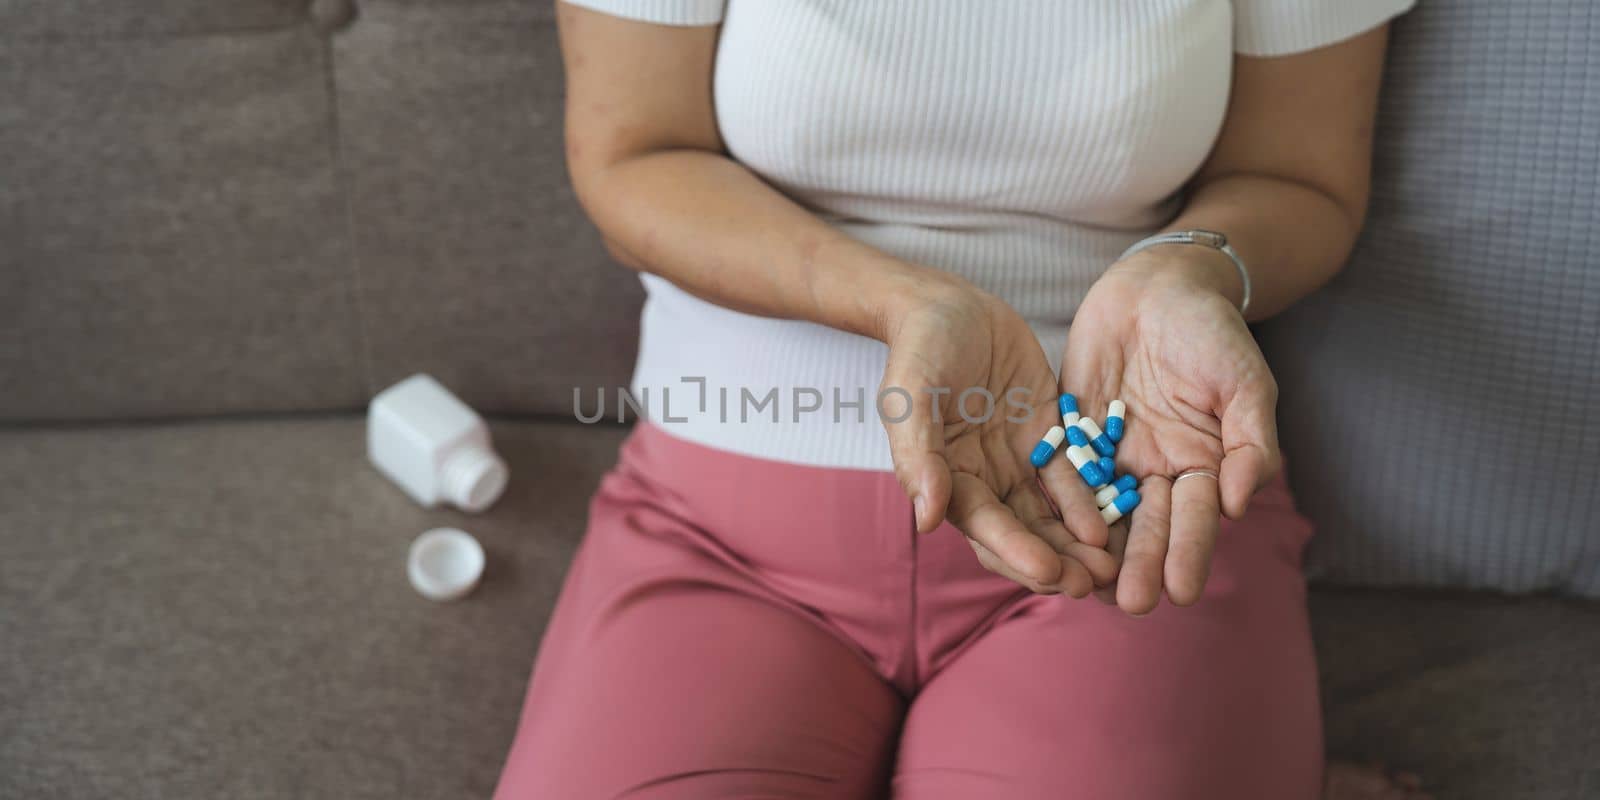 Elderly sick ill woman hold pills on hand pouring capsules from medication bottle take painkiller supplement medicine, old senior people pharmaceutical healthcare treatment concept, close up view.